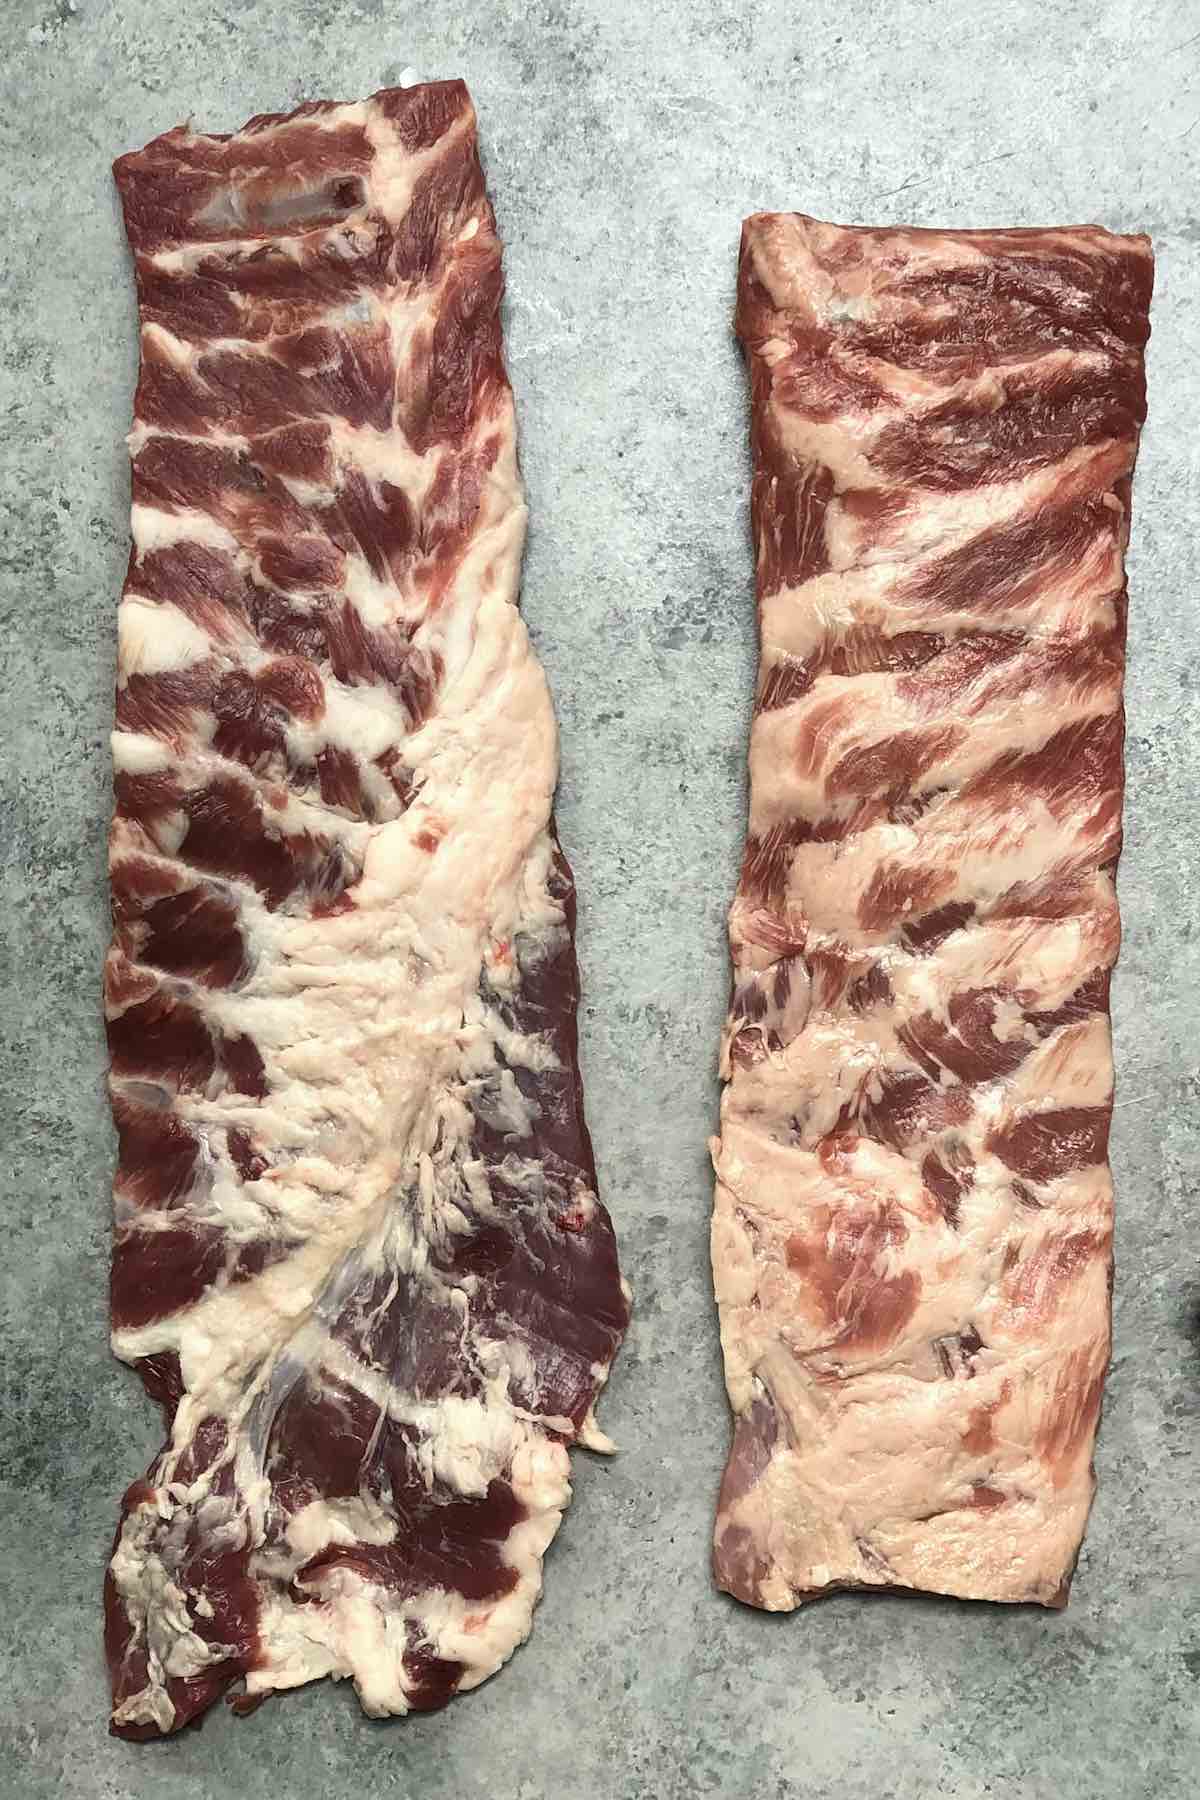 Side-by-side comparison of a rack of spare ribs and St Louis ribs